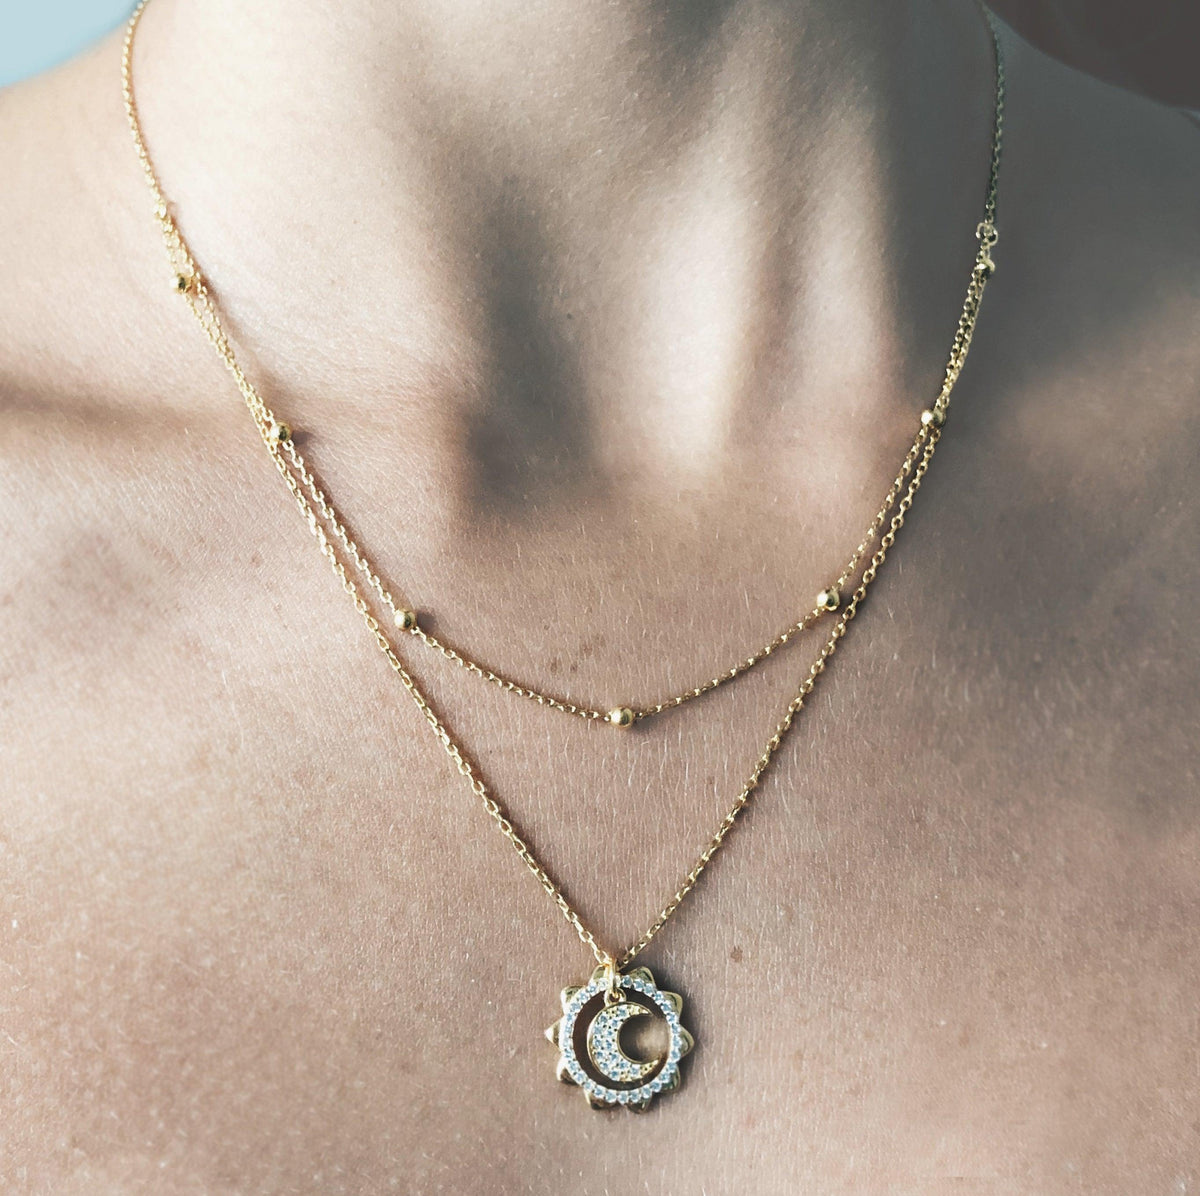 Moon Phases Necklace - Celestial 14K Gold Vermeil with Sparkling Cubic Zirconia Stones